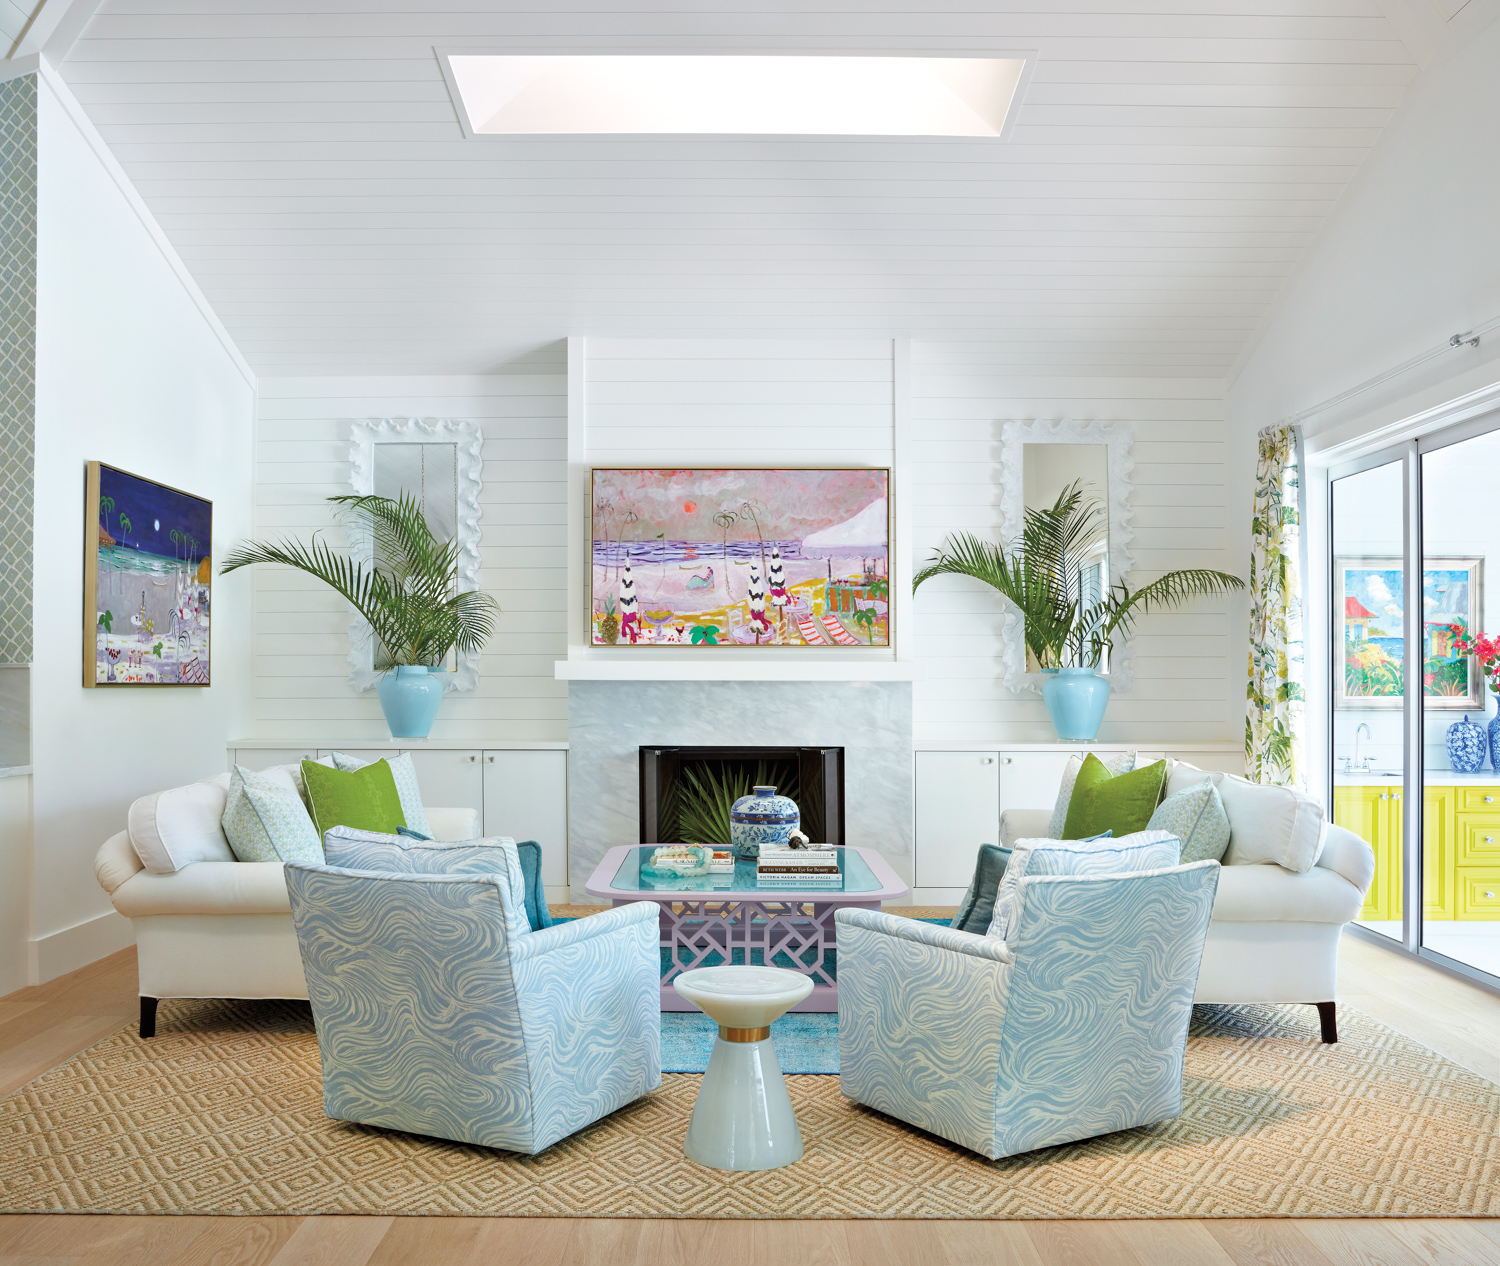 Unearthing A Tequesta Abode’s Colorful Potential Leads A Designer Home {Unearthing A Tequesta Abode’s Colorful Potential Leads A Designer Home} – English